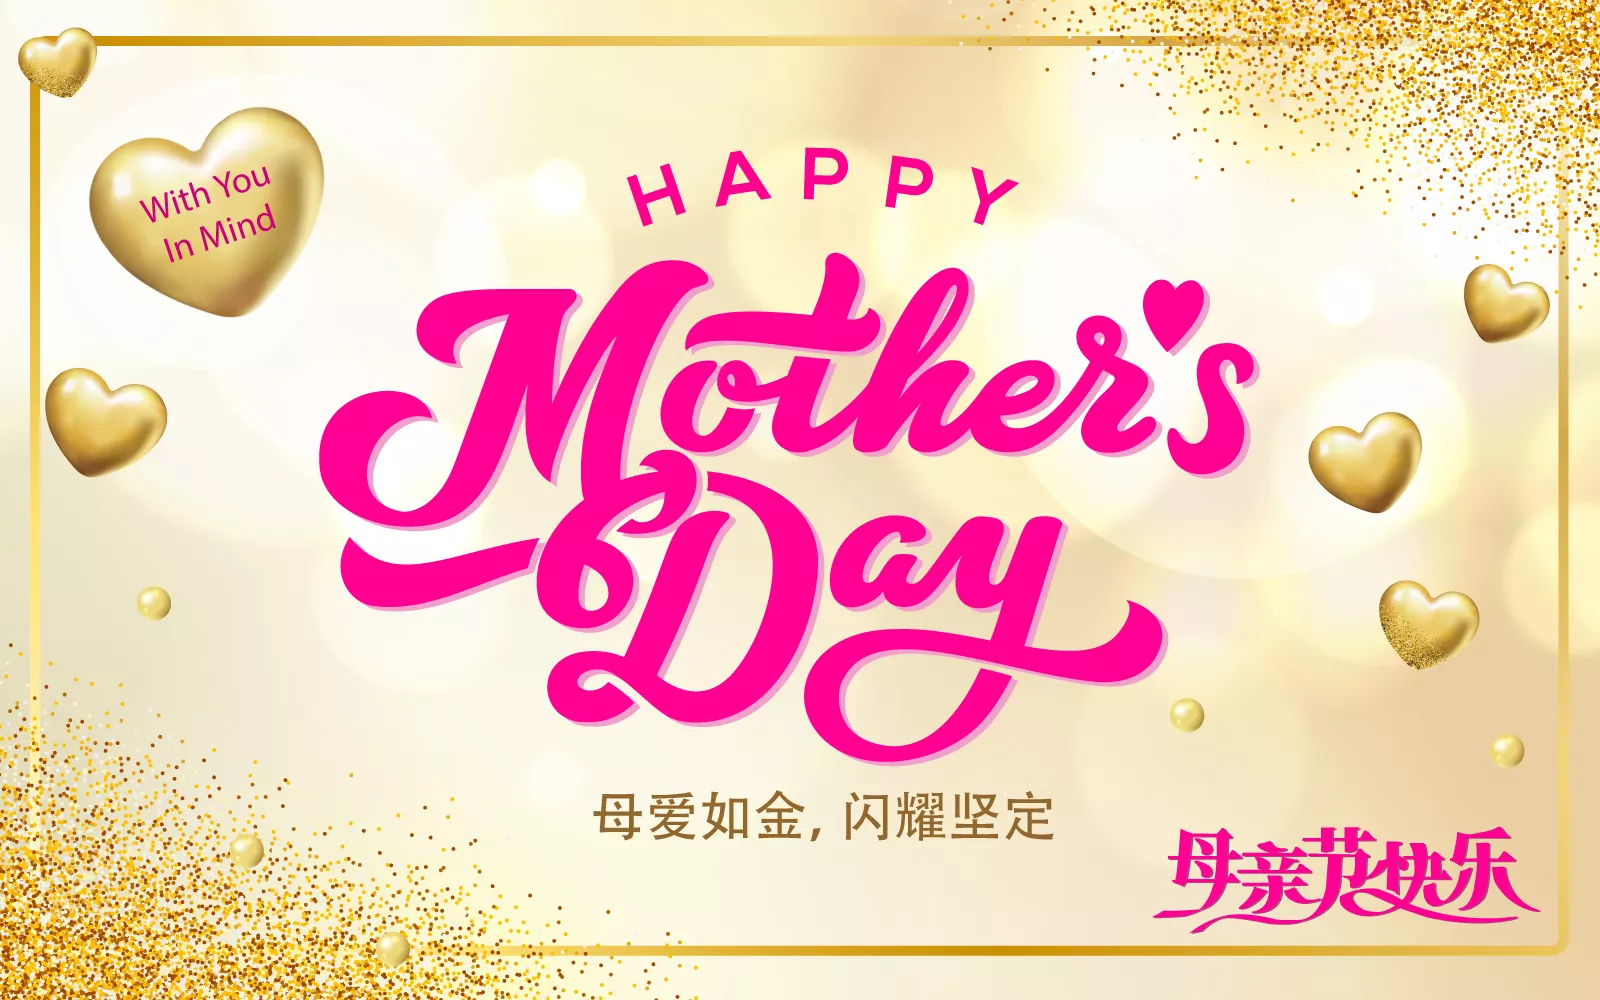 CELEBRATE MOTHER'S DAY